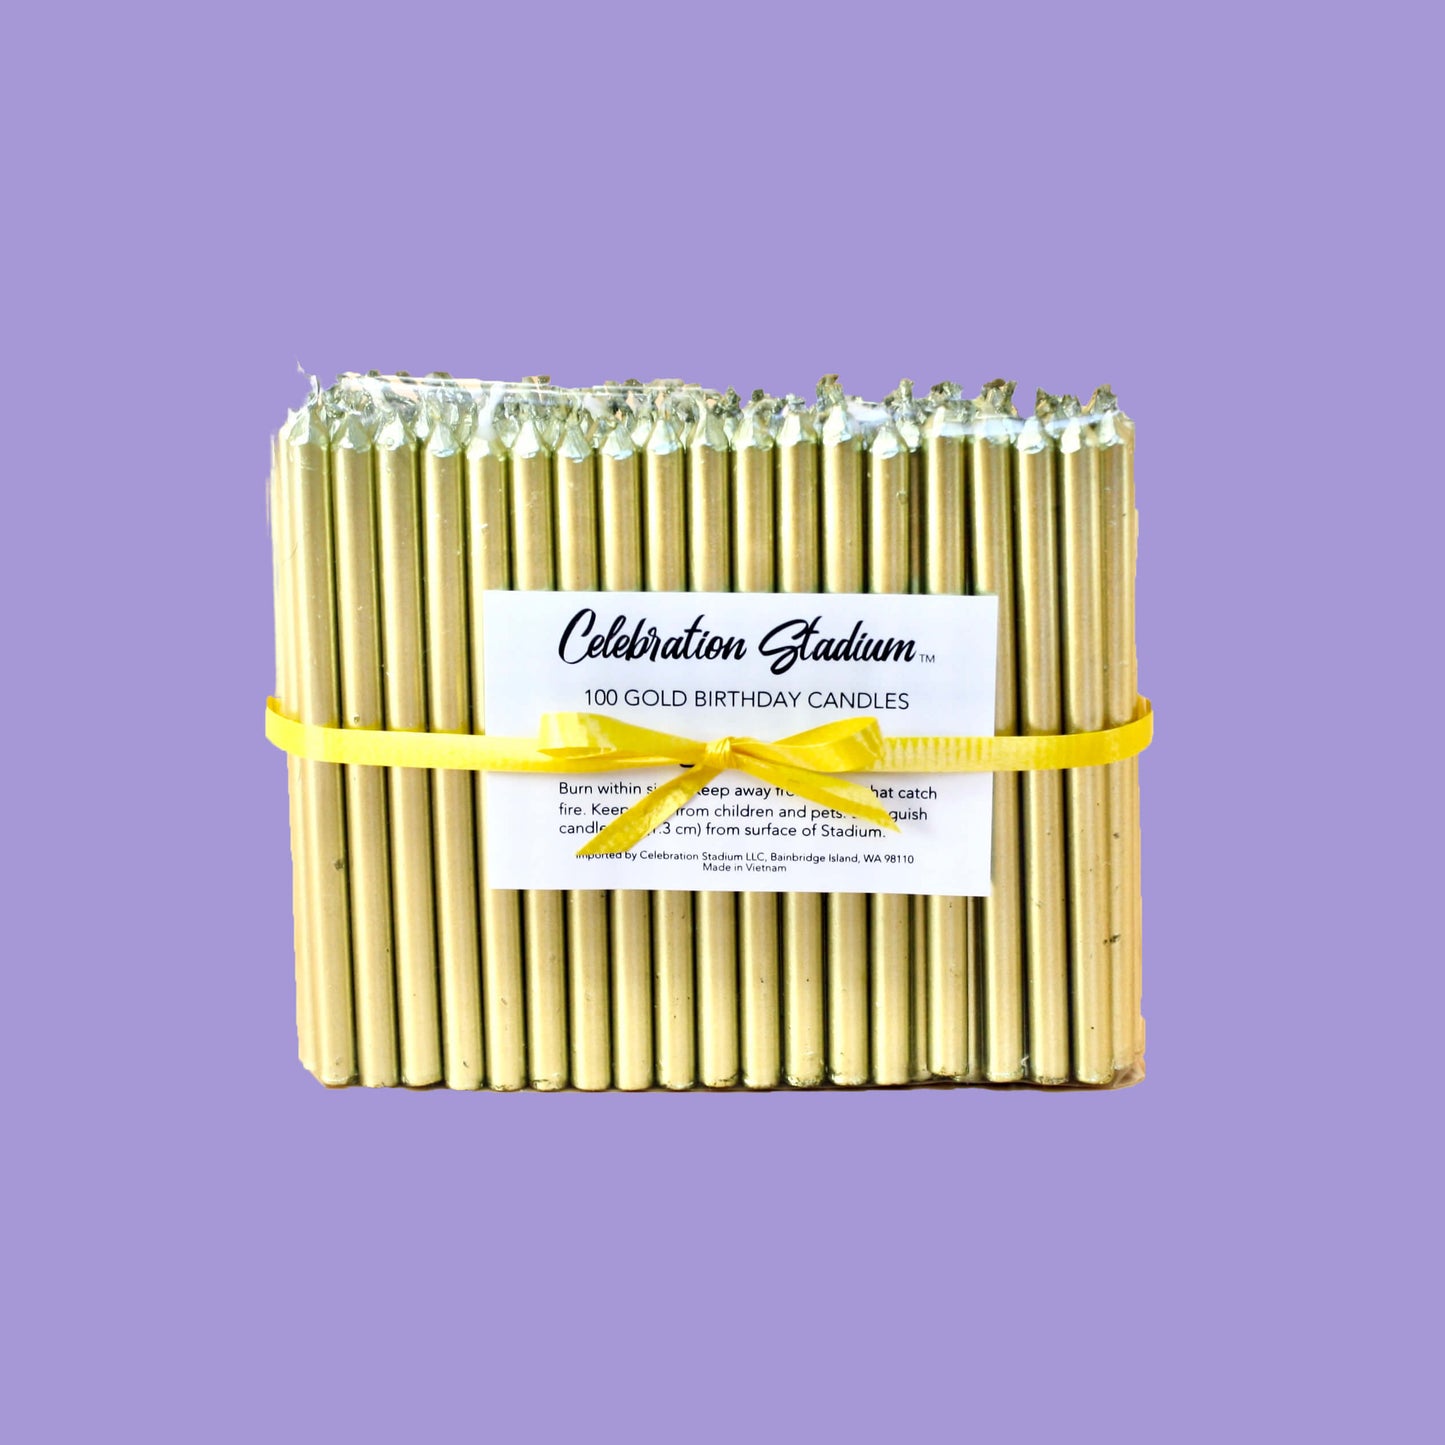 100 gold birthday candles, extra long, included with the Candelabra